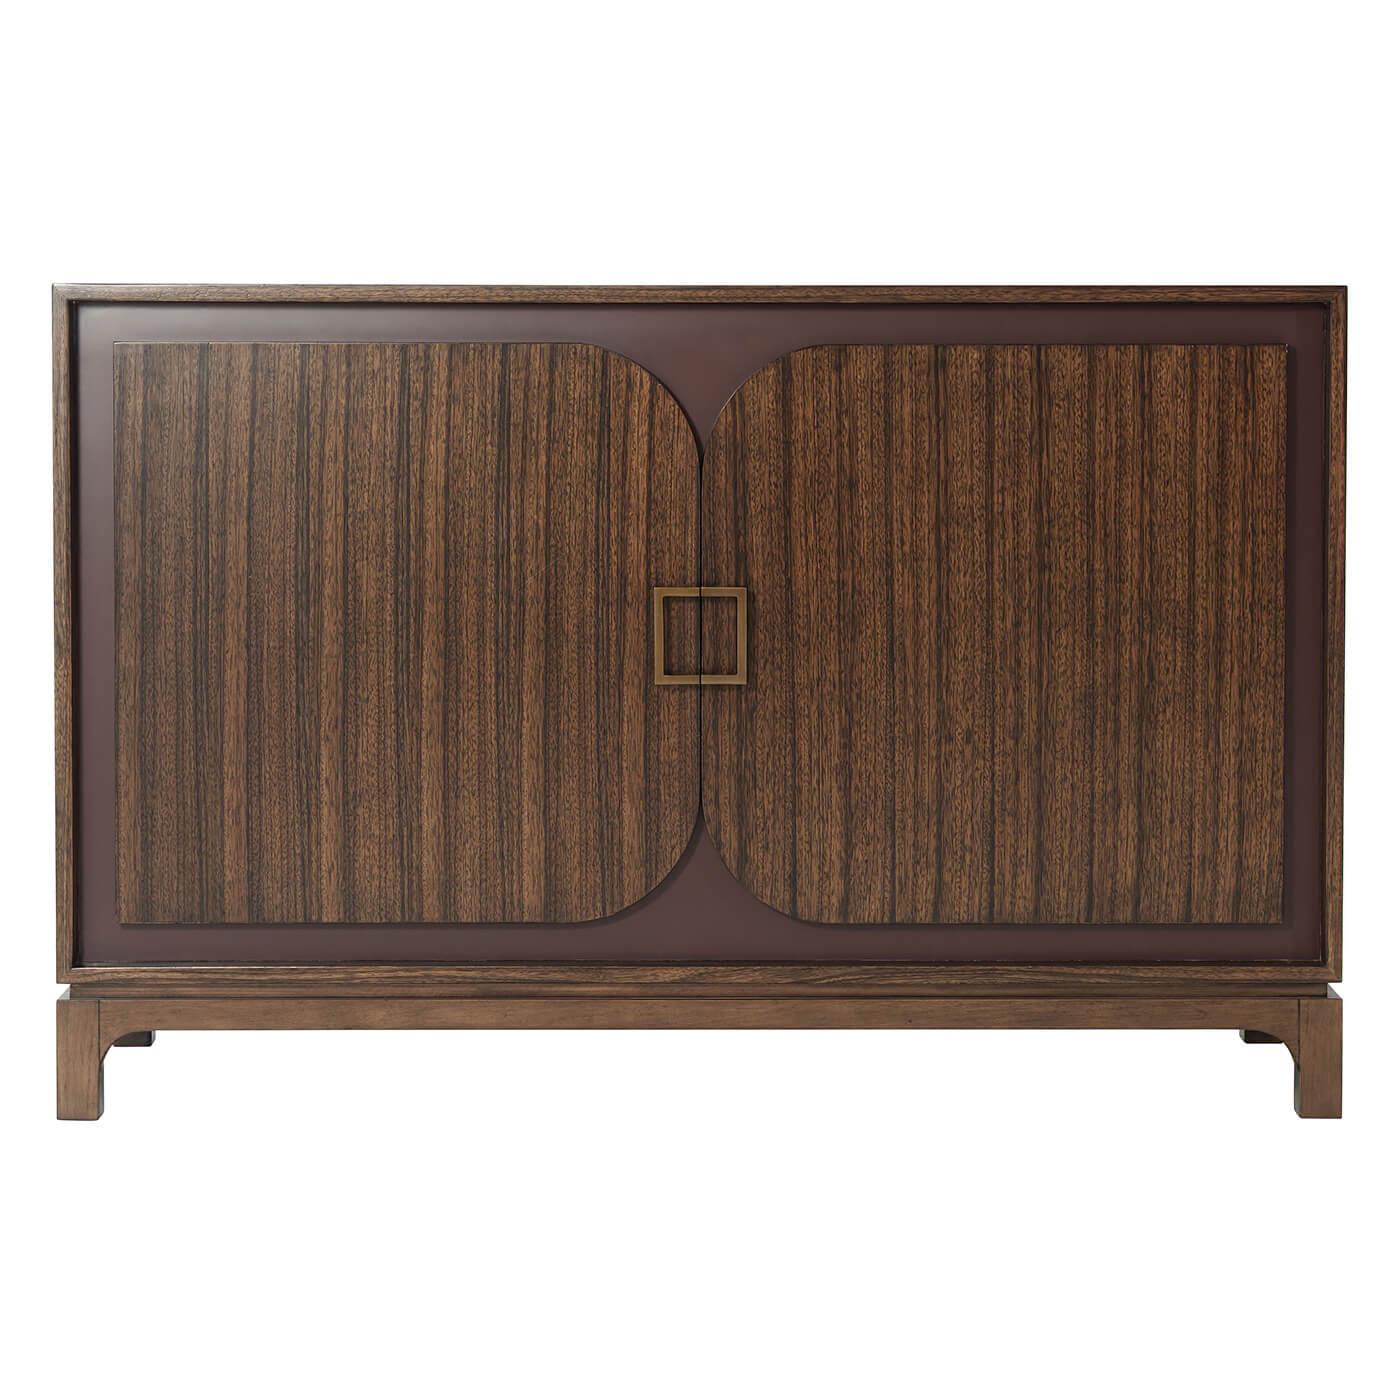 French modern cabinet with quartered Paldao veneered case with a hazelnut finish, burgundy lacquered recessed door background with floating square brass handles with adjustable shelves to the interior.
Dimensions: 52